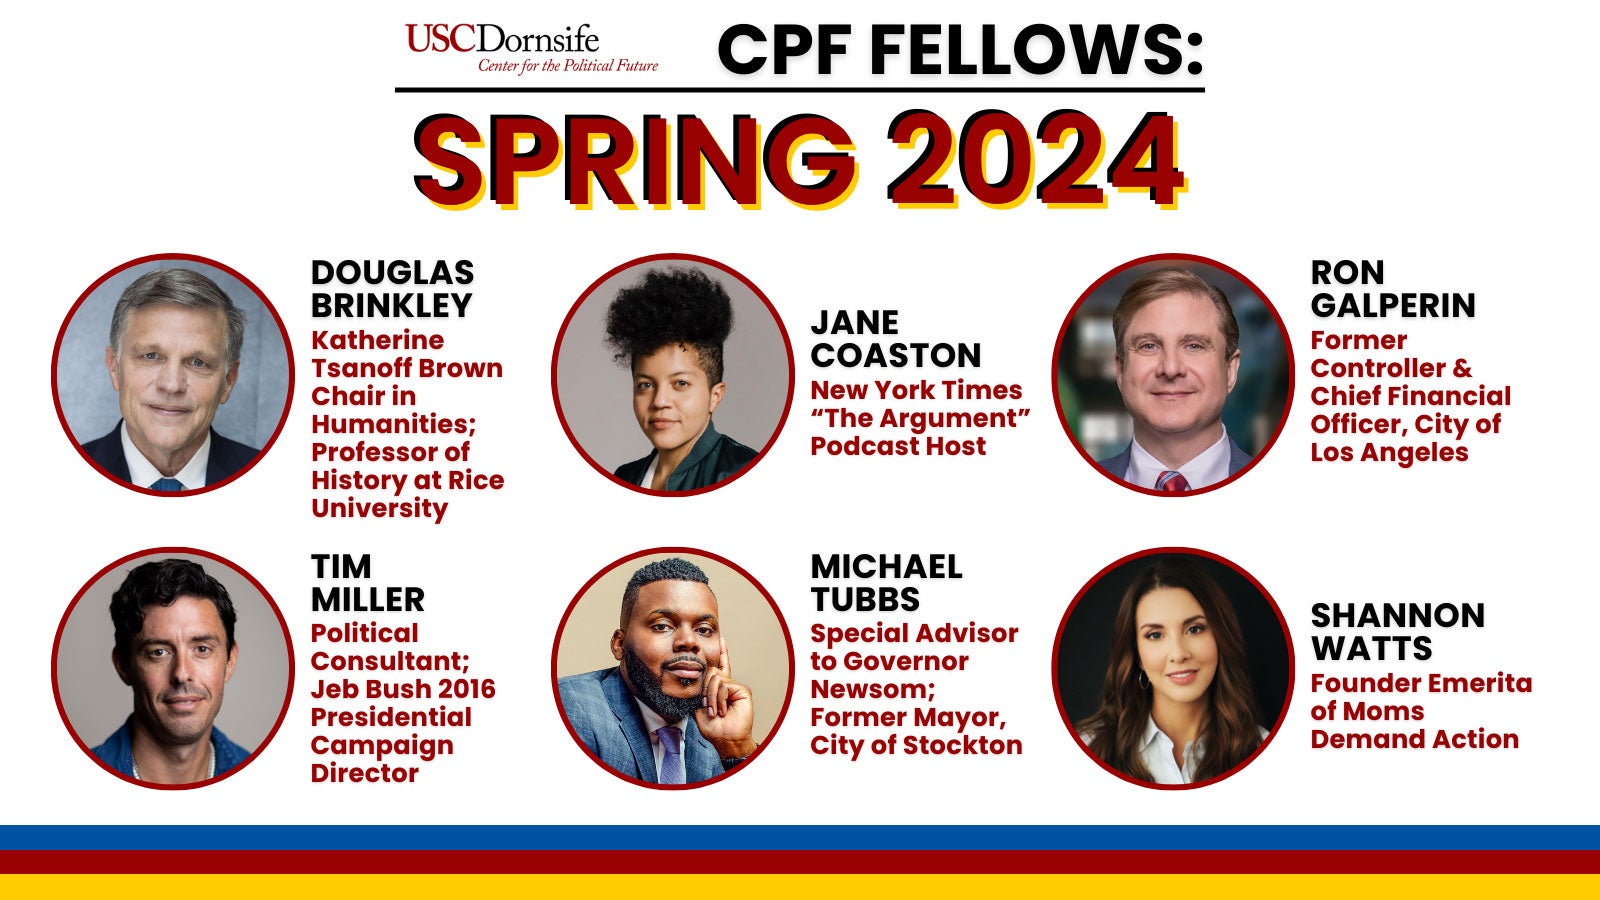 Graphic highlighting the Spring 2024 CPF Fellows